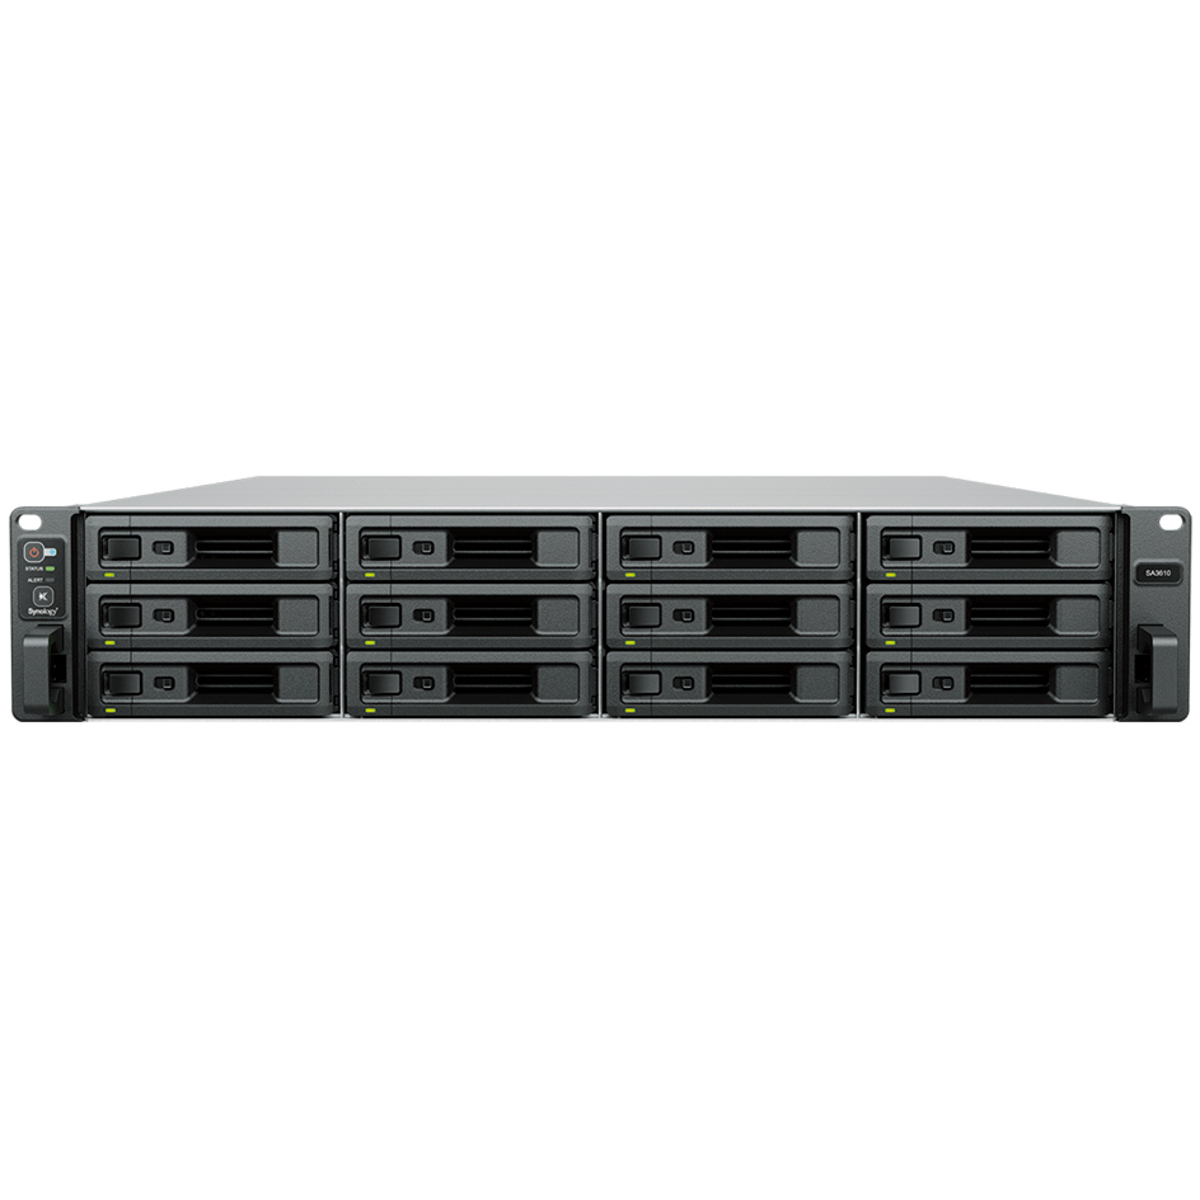 Synology RackStation SA3610 10.5tb 12-Bay RackMount Large Business / Enterprise NAS - Network Attached Storage Device 11x960gb Synology SAT5210 Series SAT5210-960G 2.5 530/500MB/s SATA 6Gb/s SSD ENTERPRISE Class Drives Installed - Burn-In Tested RackStation SA3610